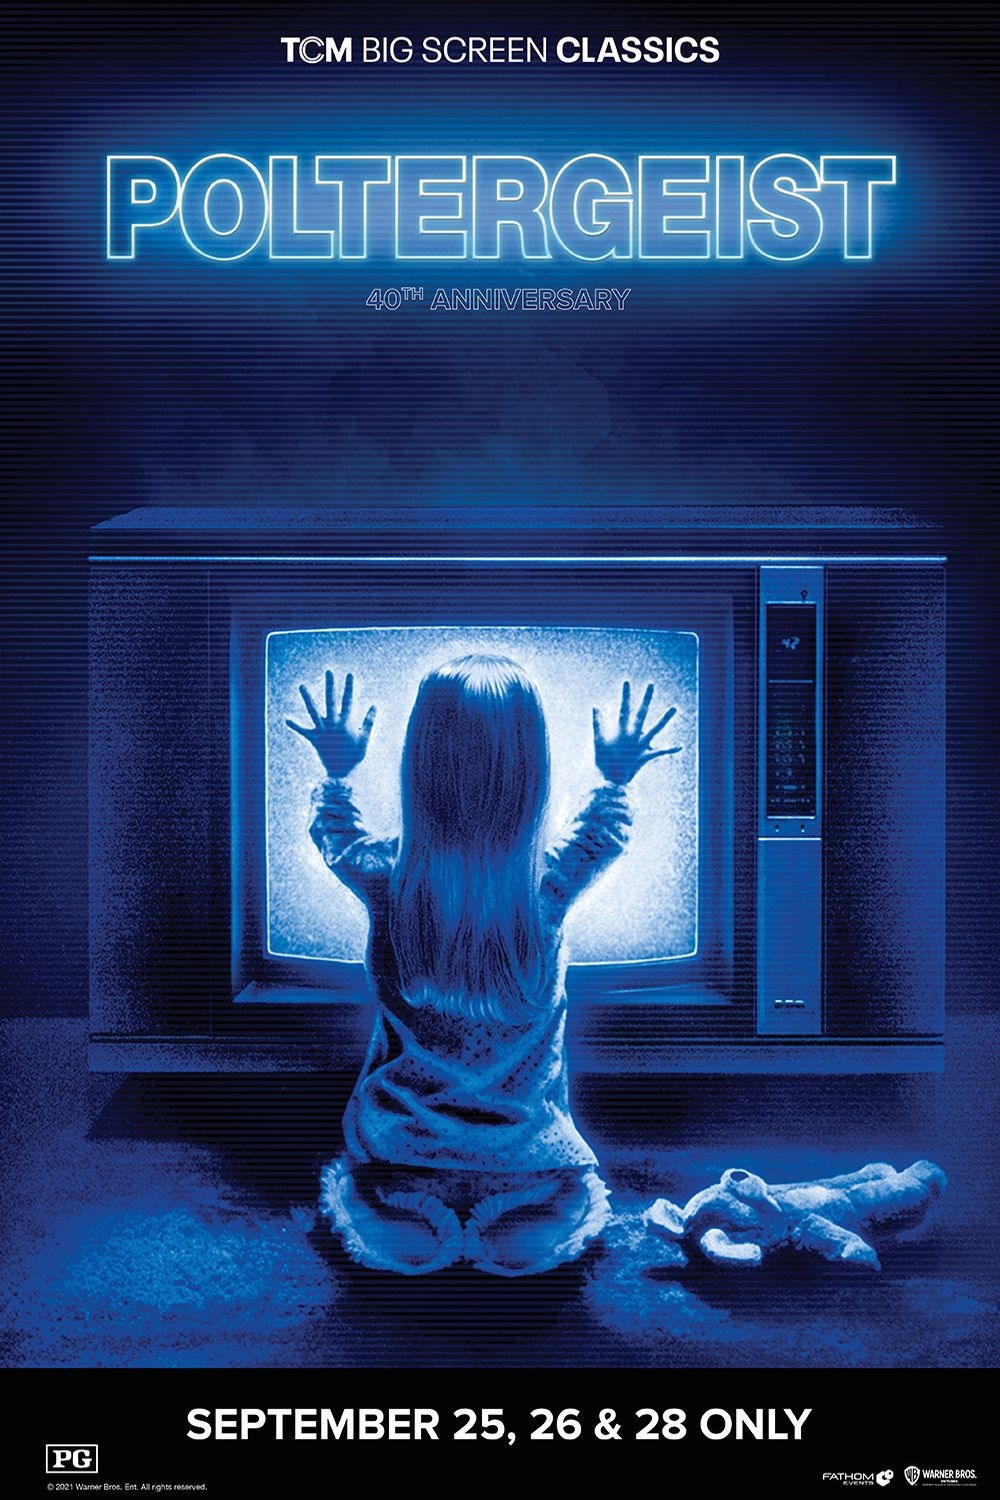 Poster of Poltergeist 40th Anniversary presented by TCM